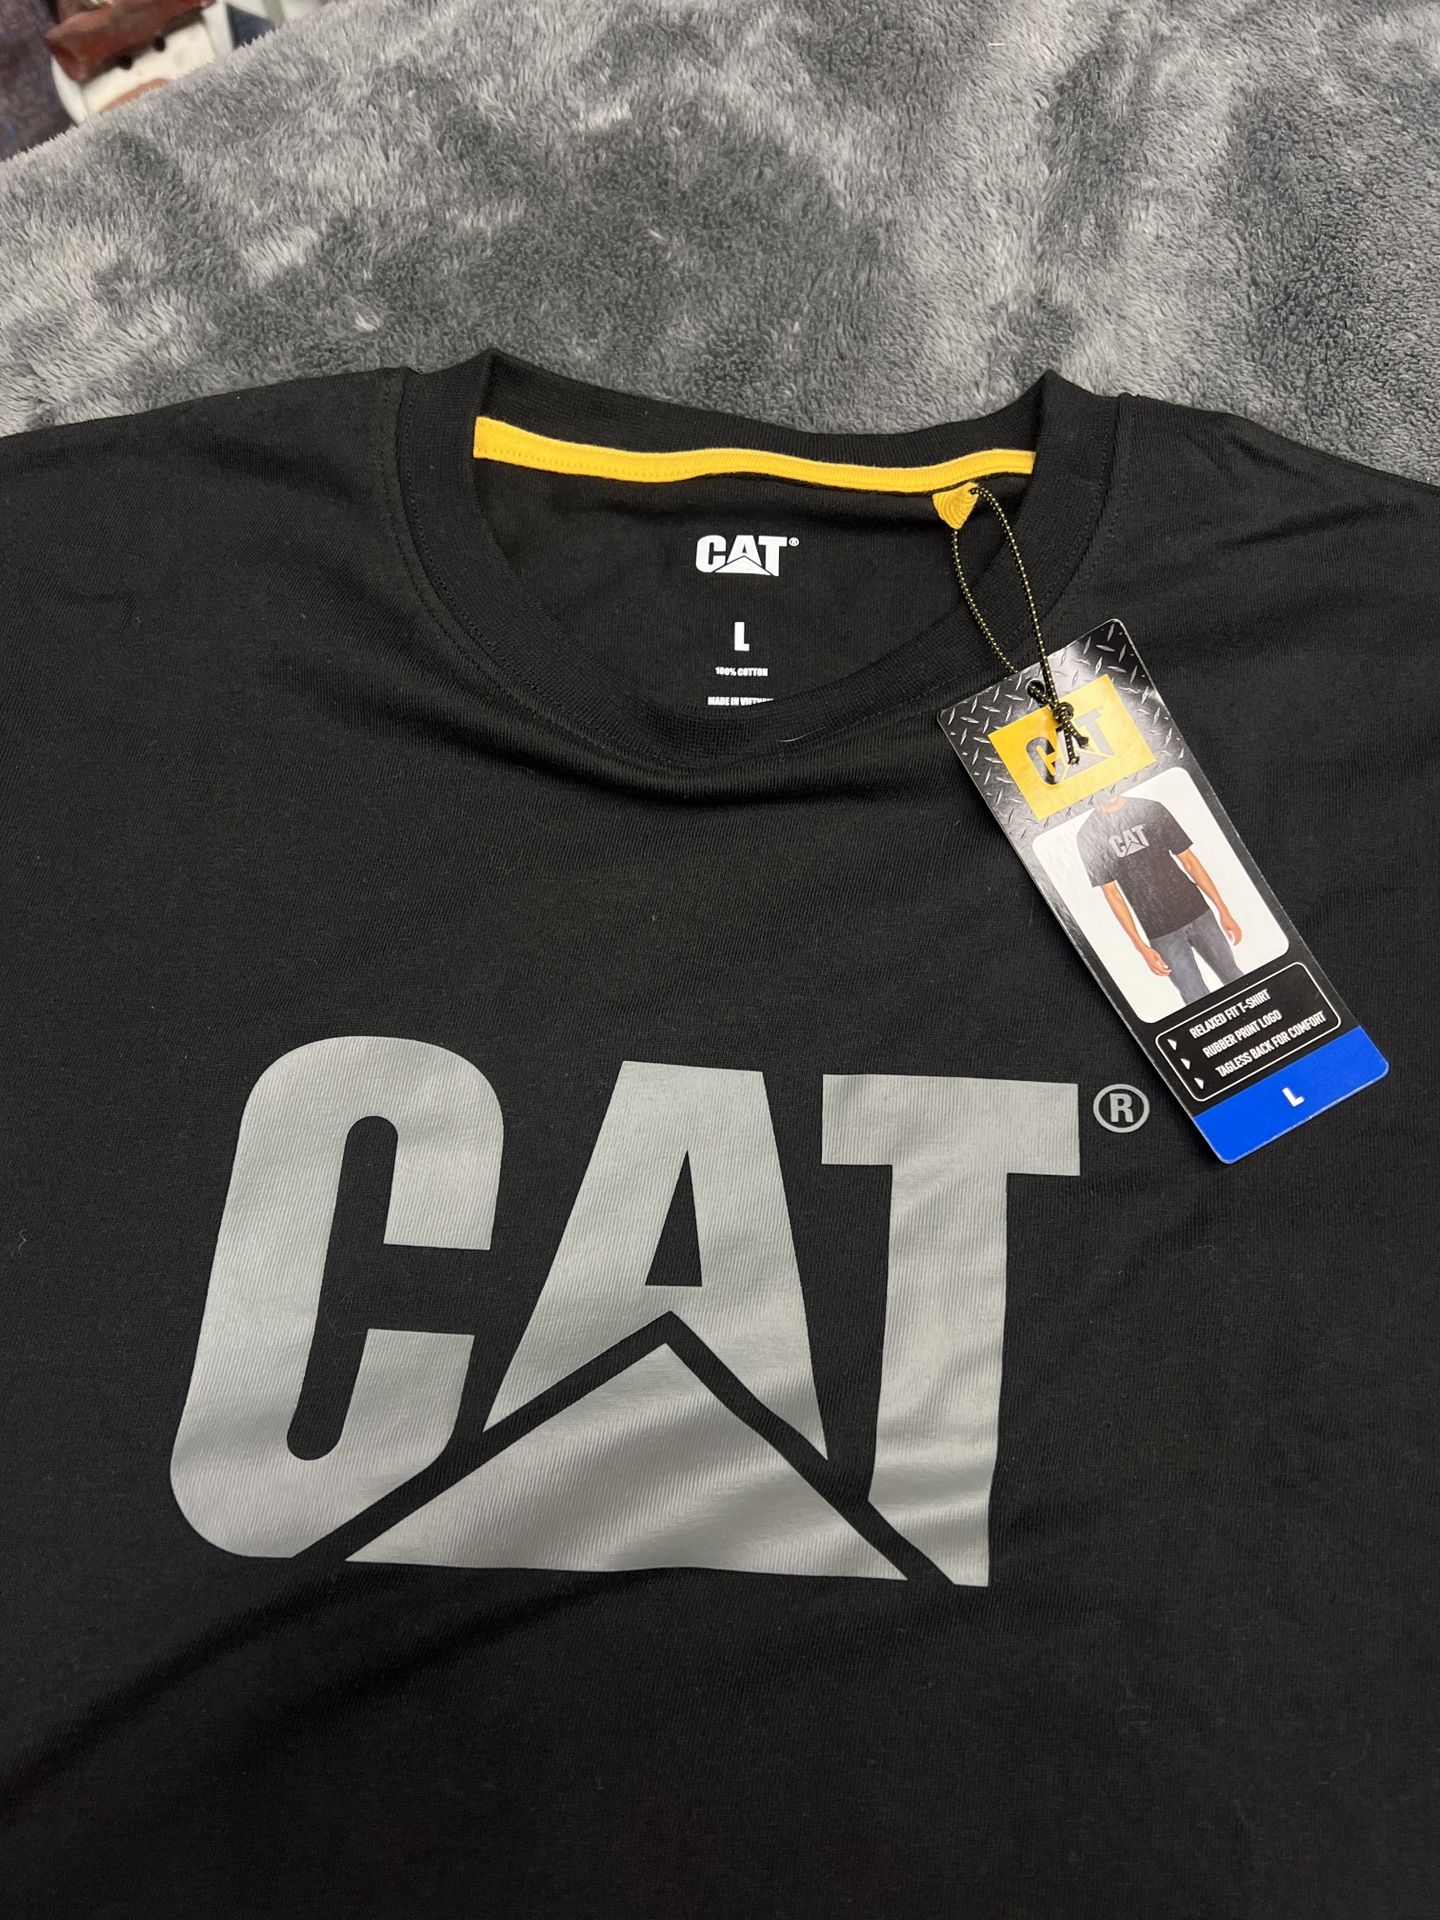 New CAT Men’s Large Tee!  brand new with tags!  